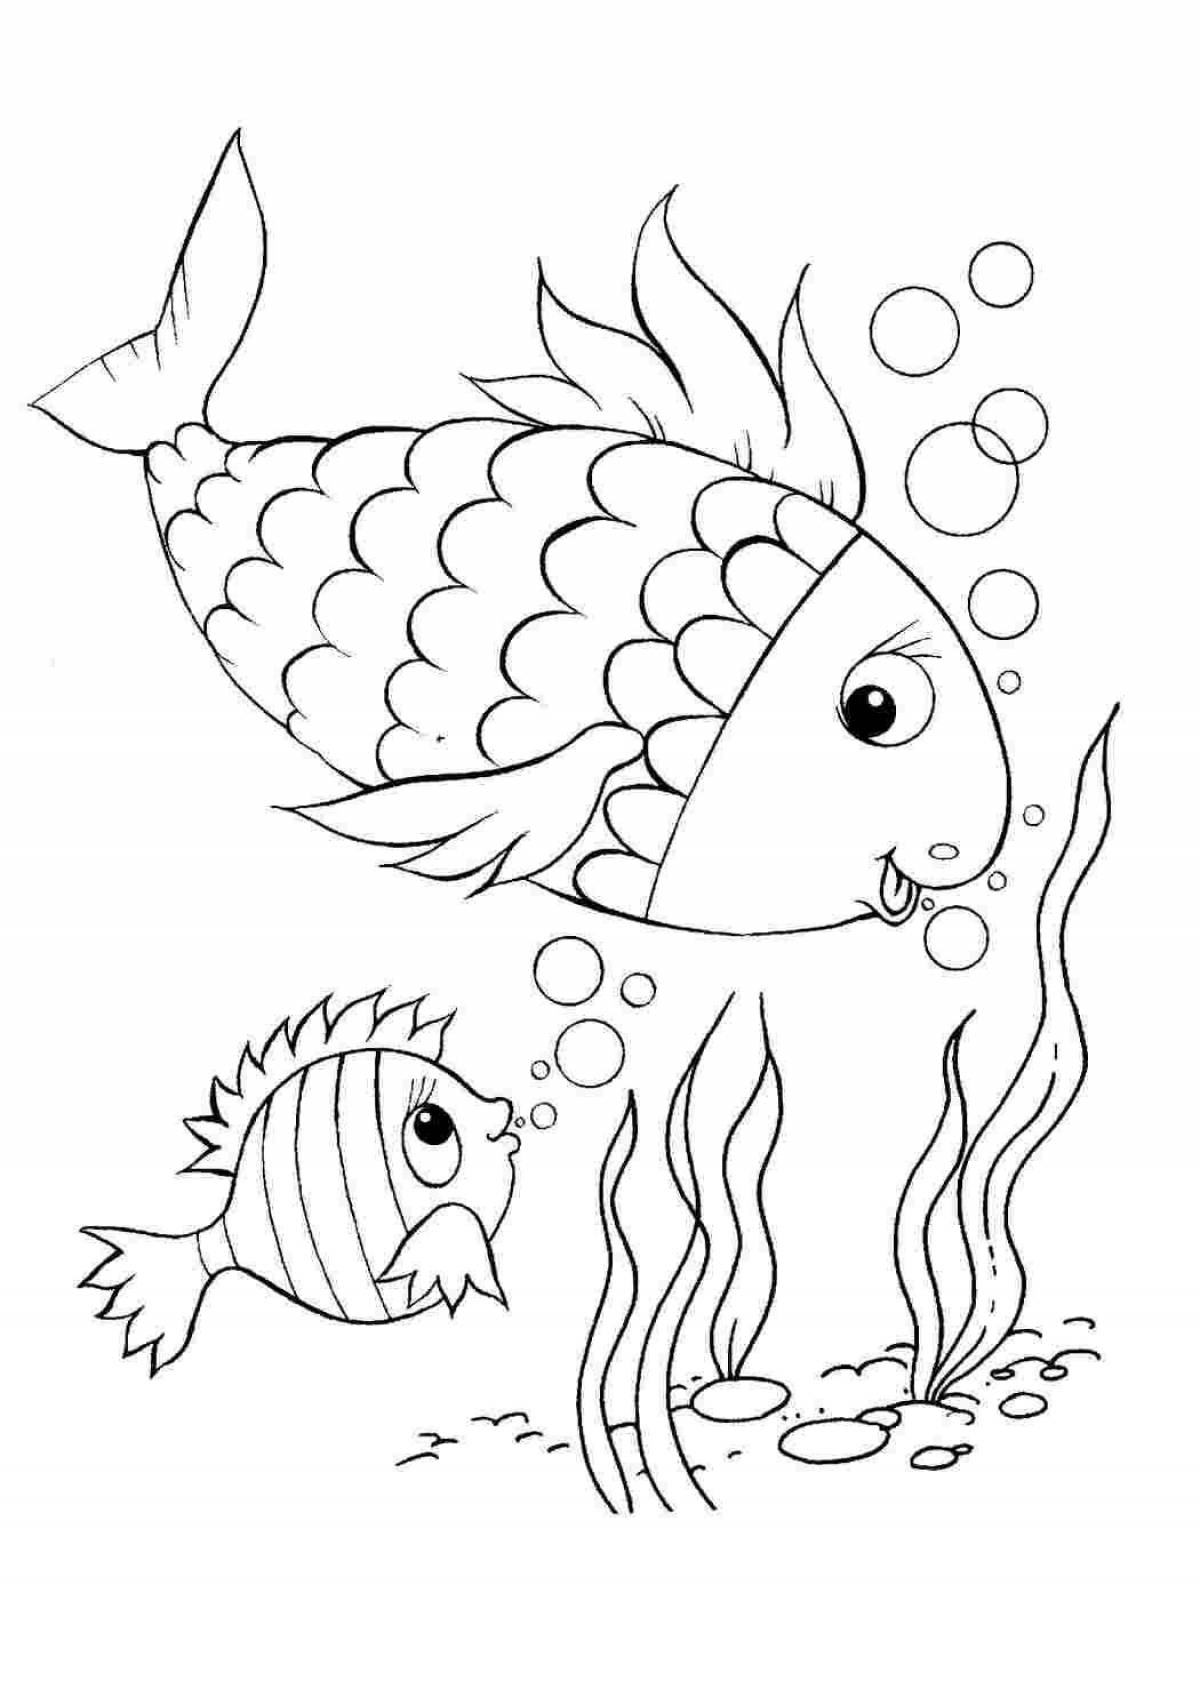 Glamorous fish coloring page for girls